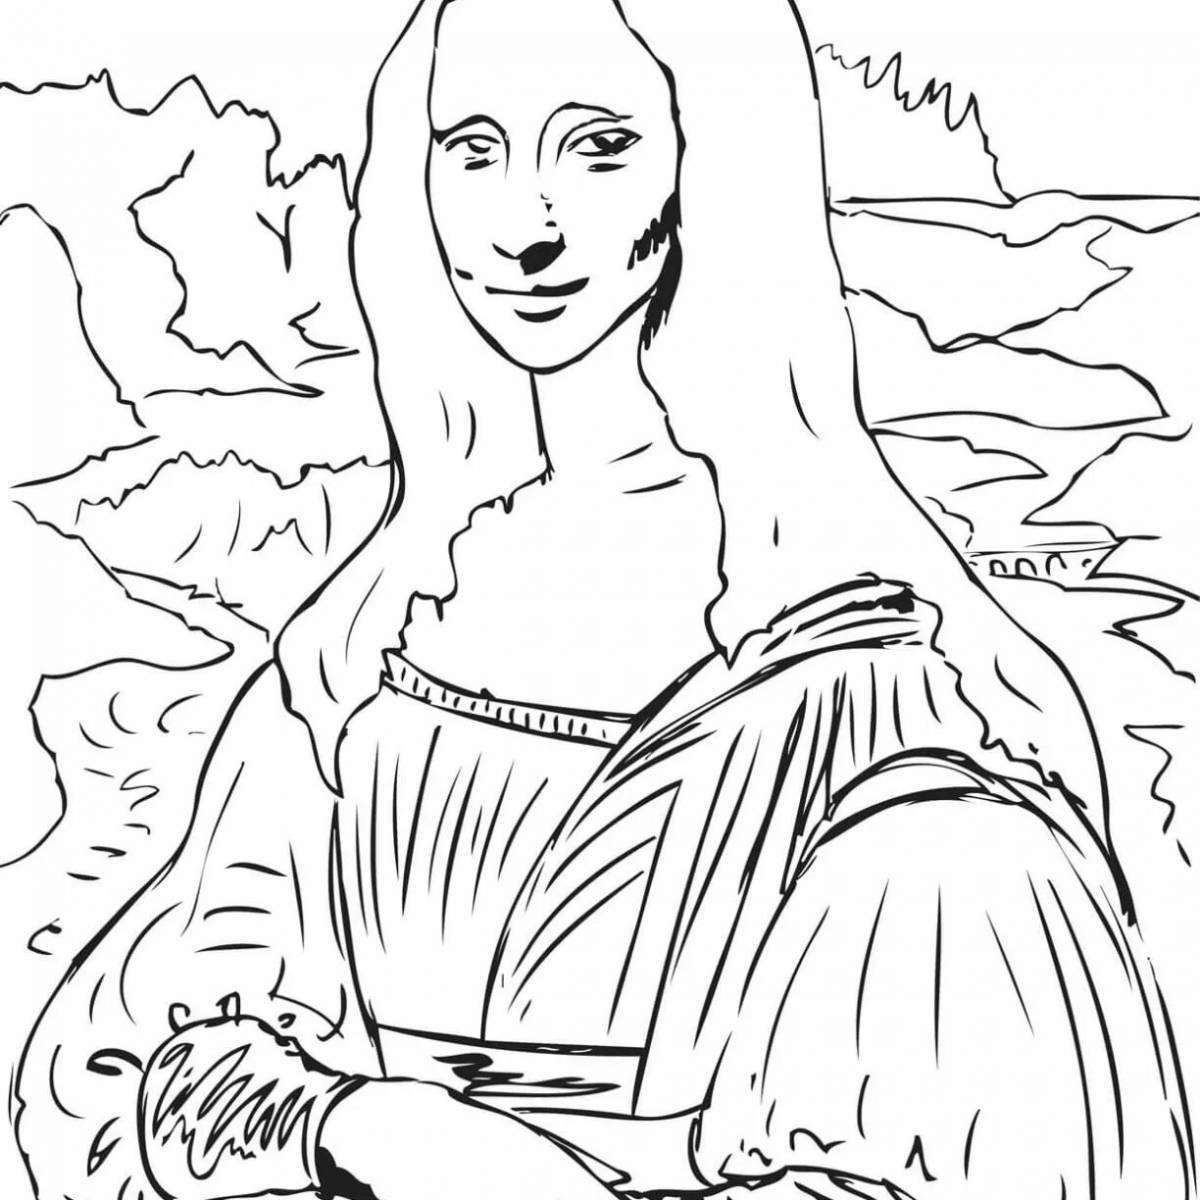 Mona lisa deluxe coloring book